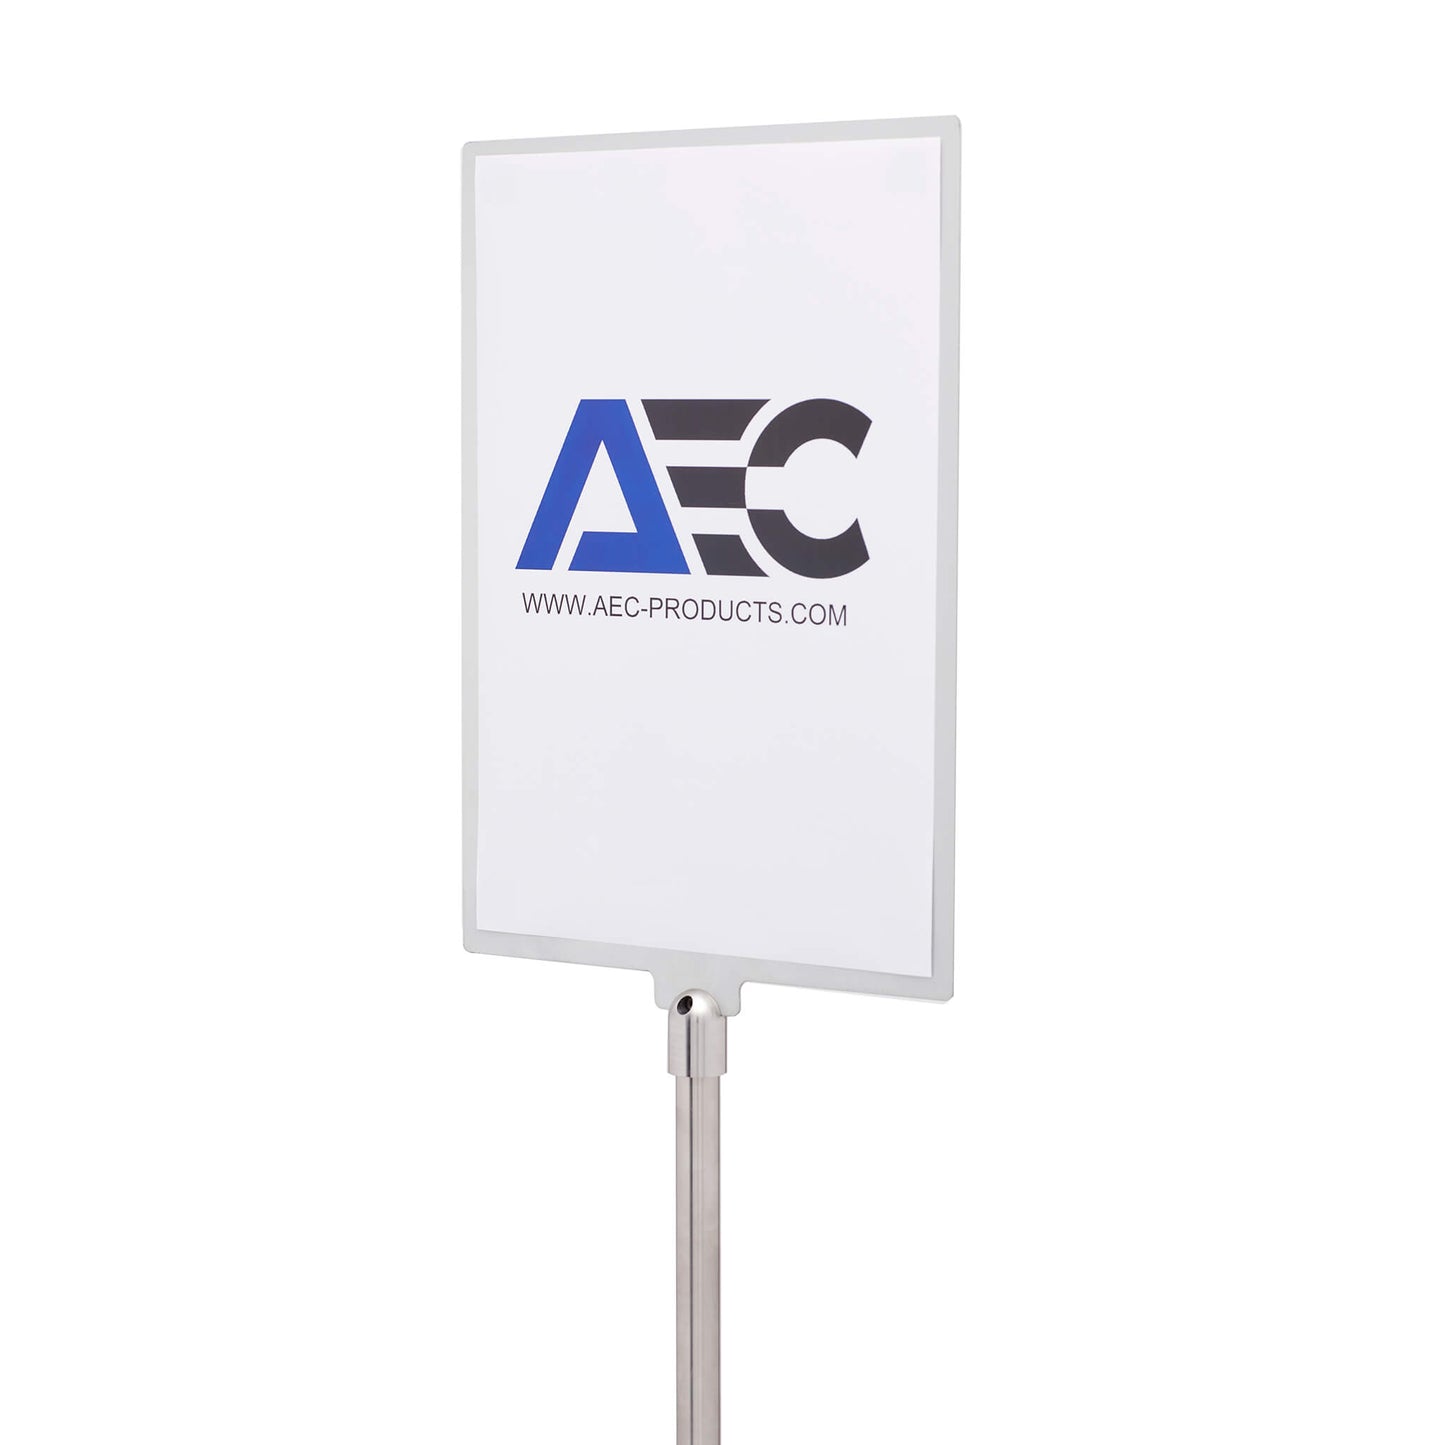 A4 Double-Sided Display Stand